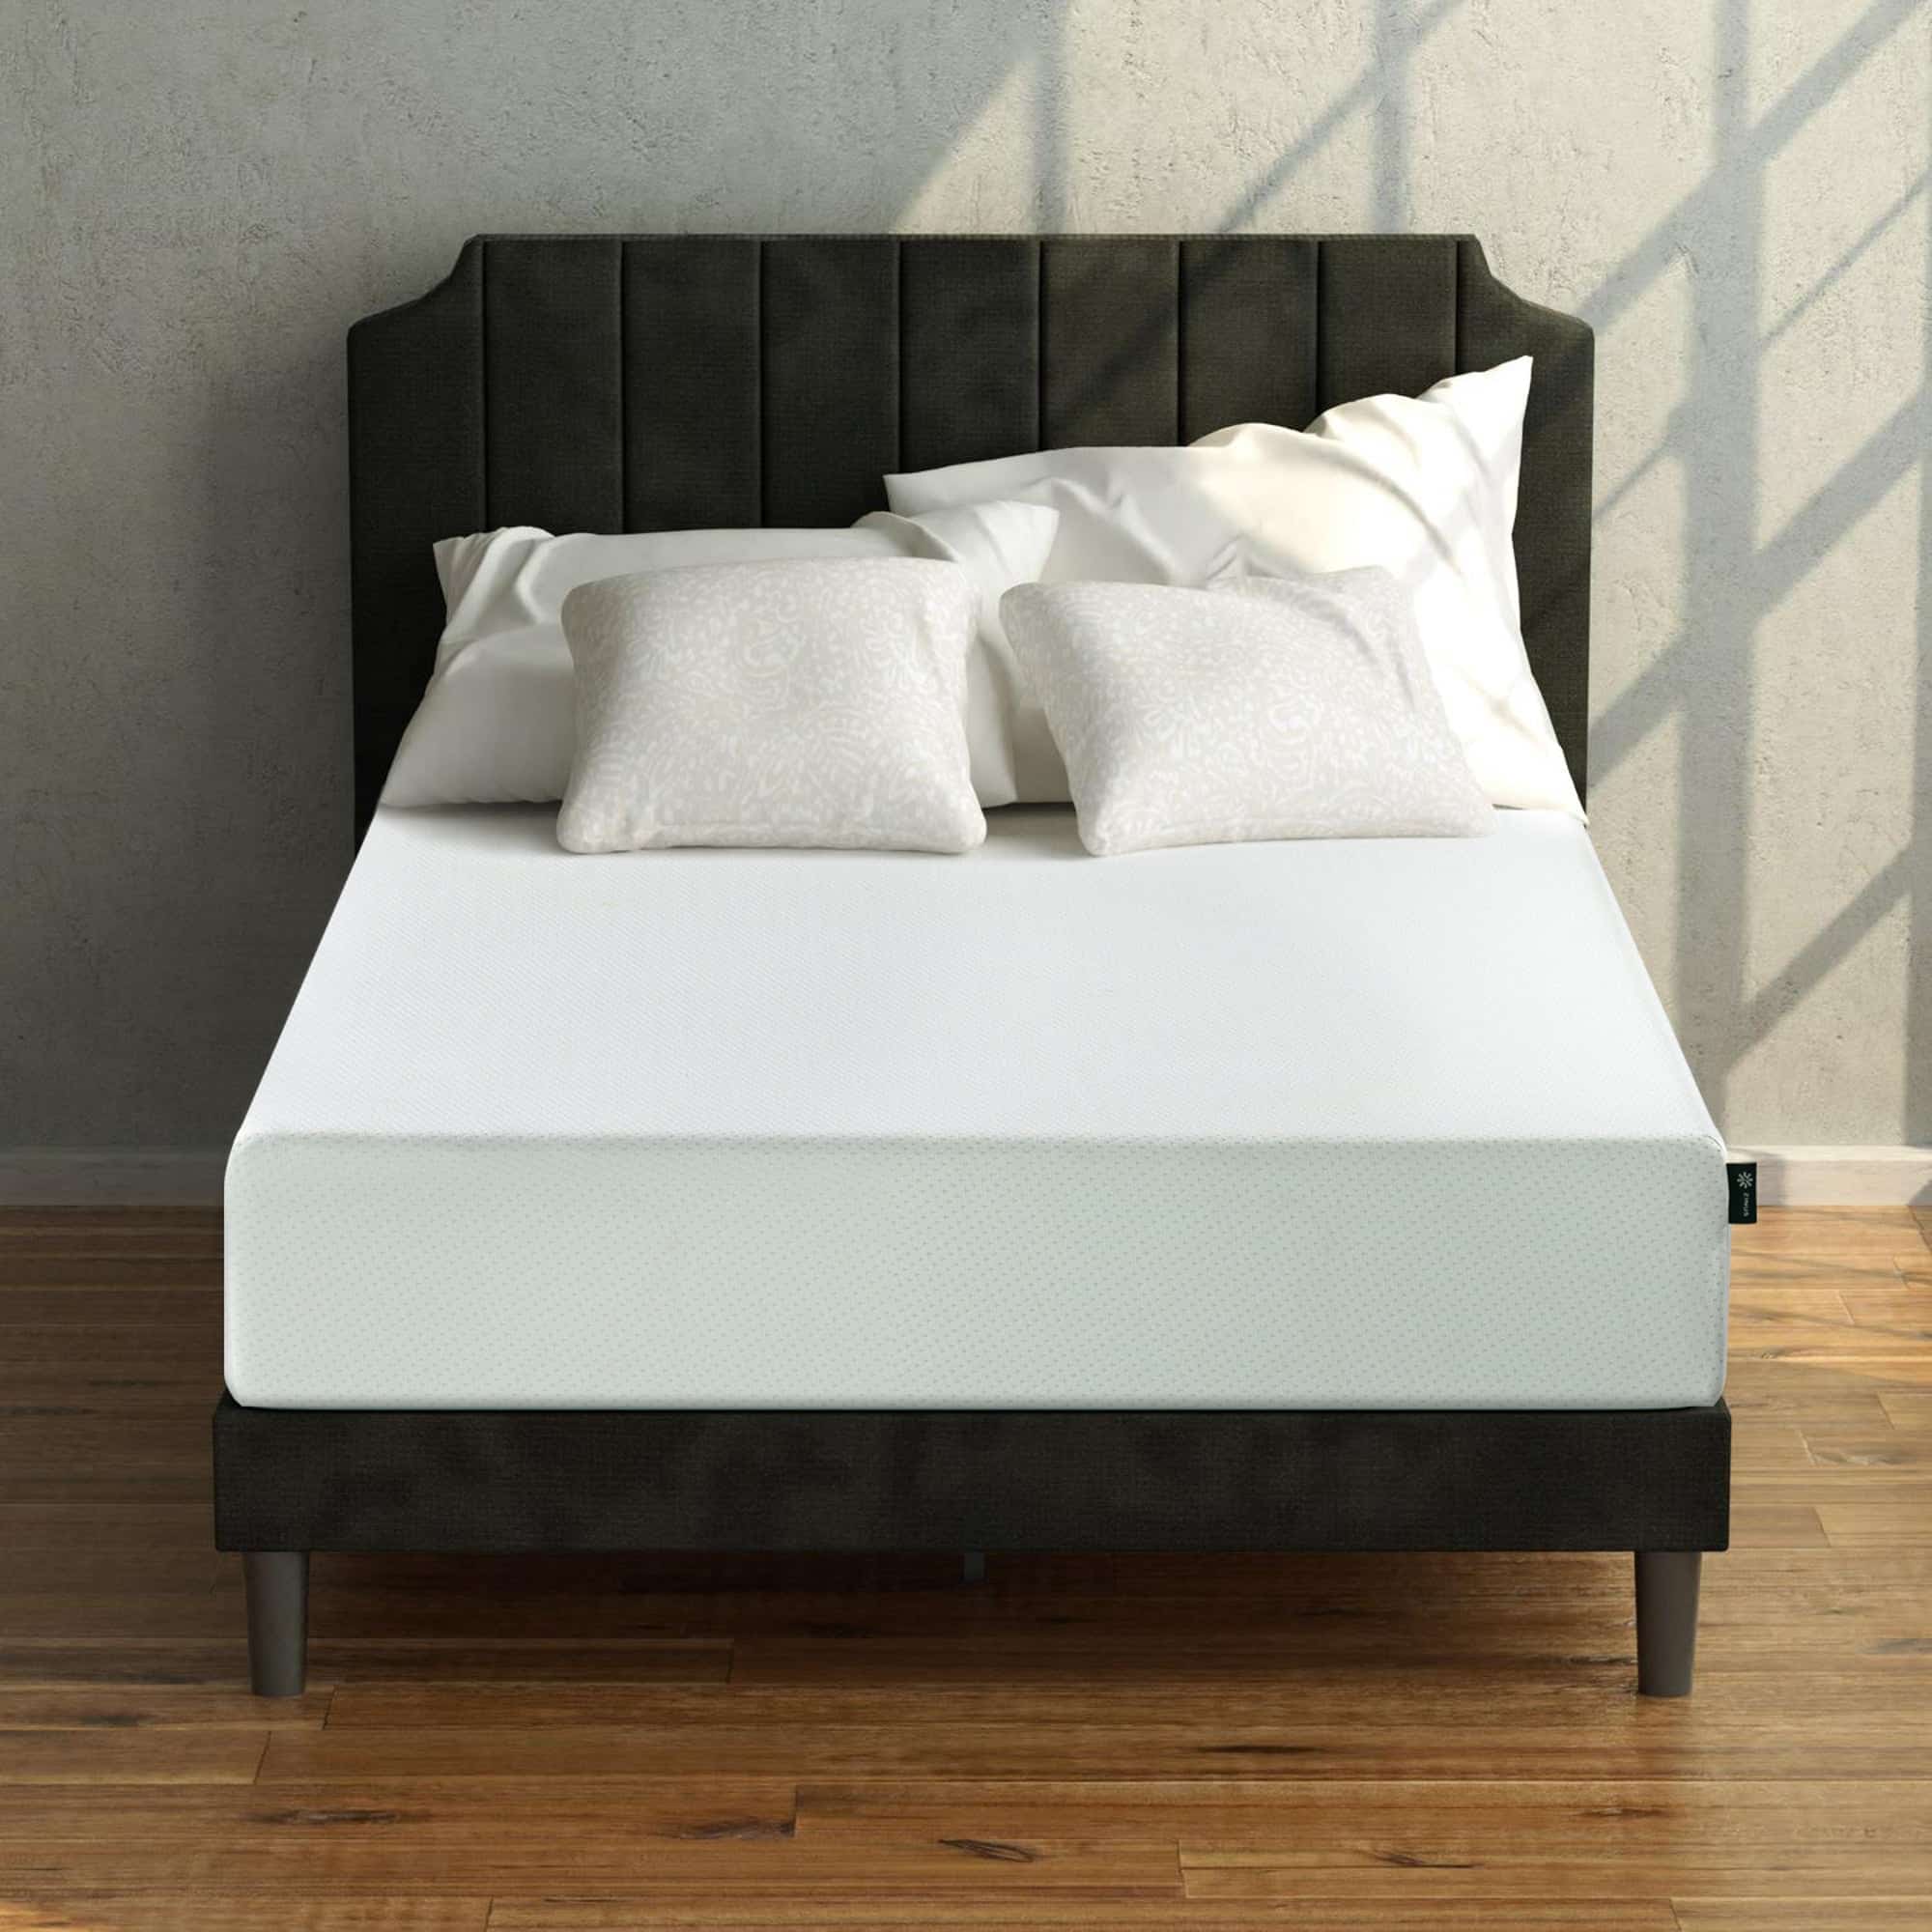 Can You Sleep On Zinus Mattress the First Night?